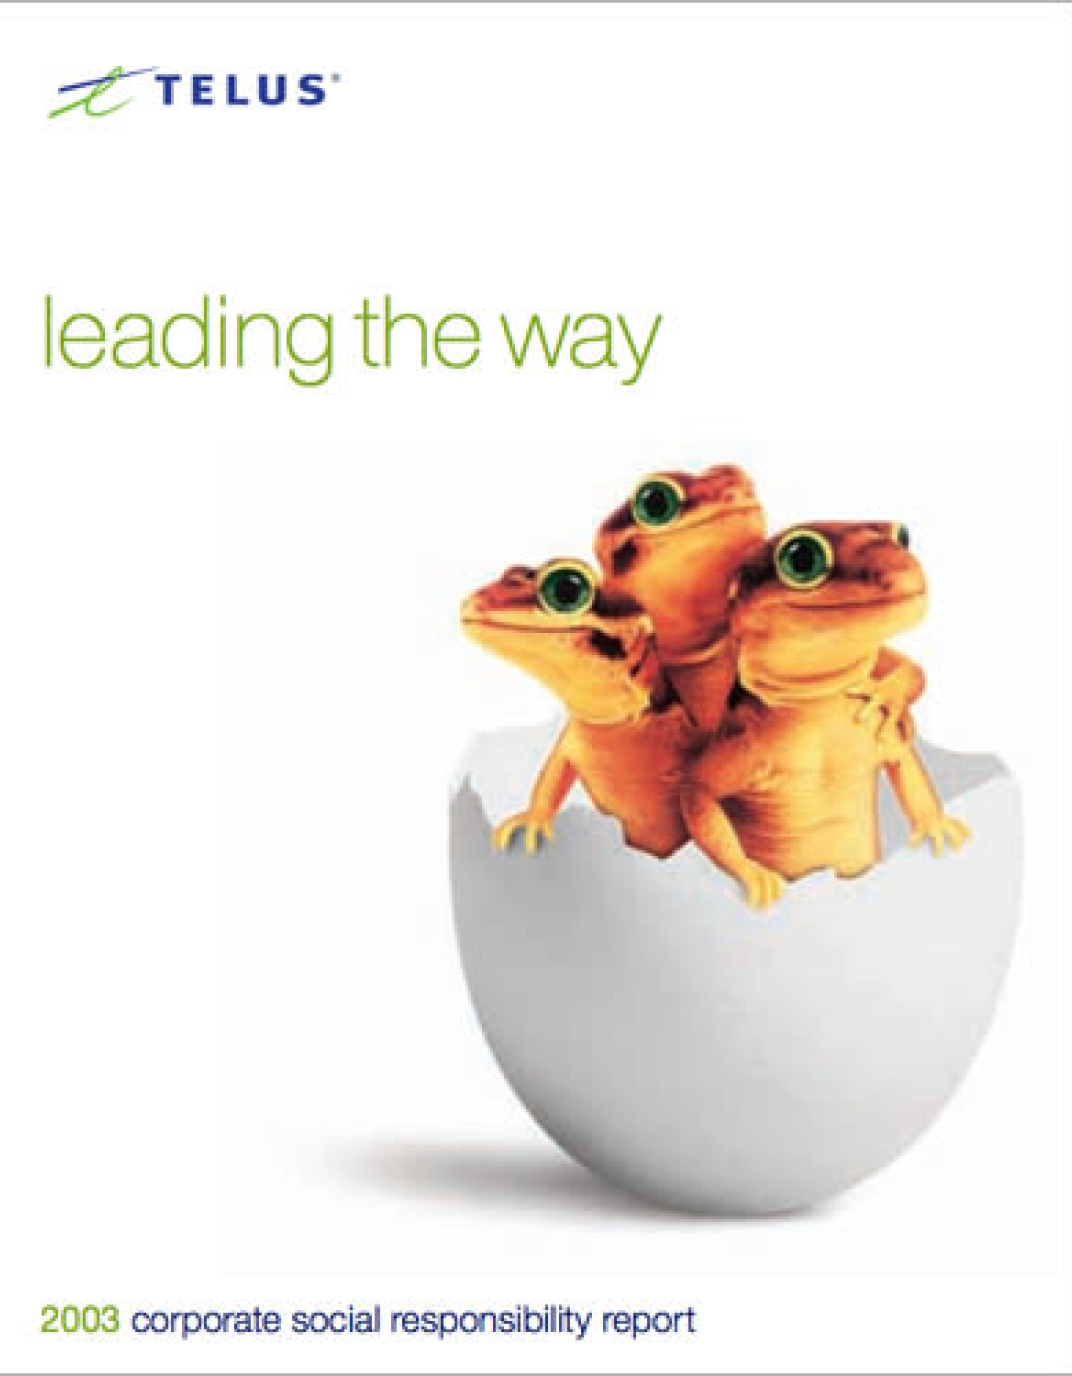 The cover of the 2003 TELUS Sustainability Report